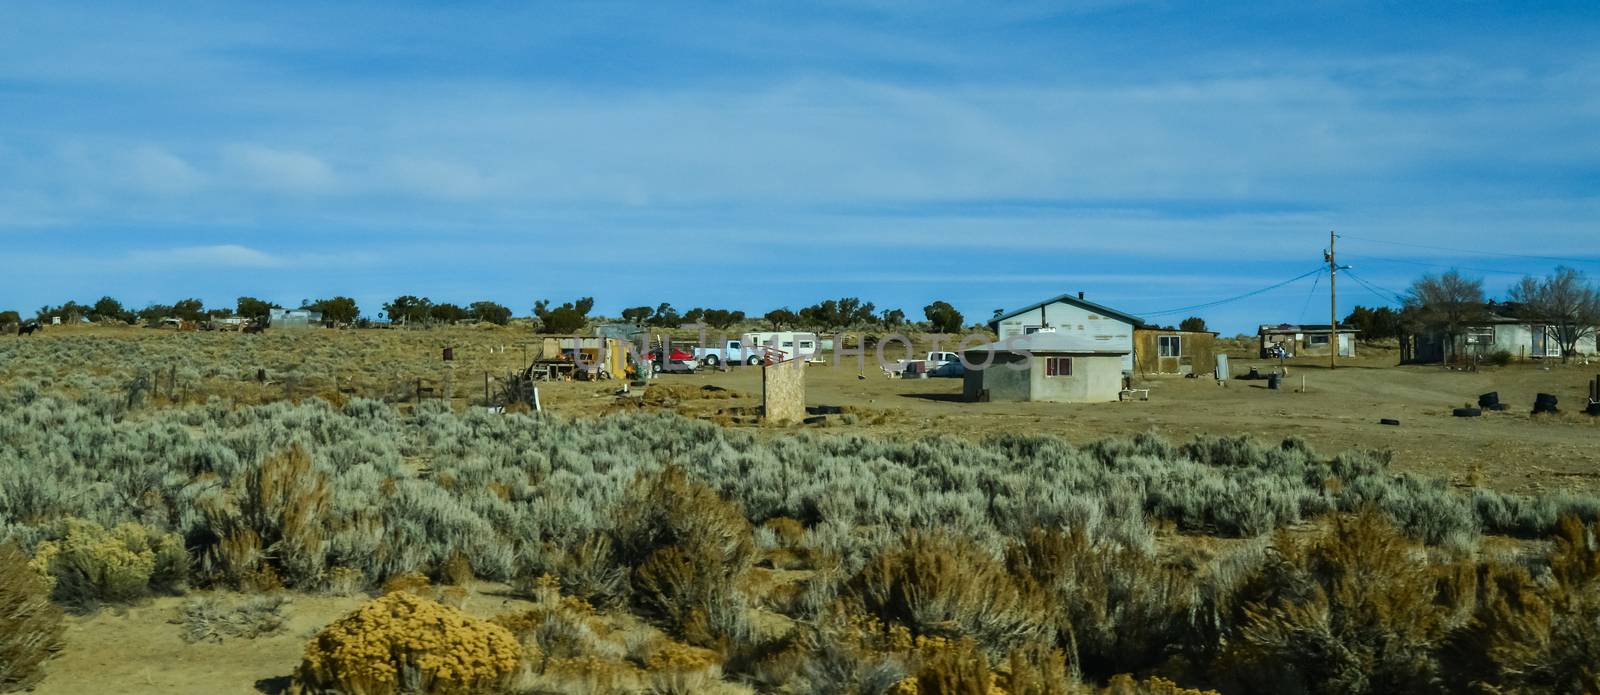 NEW MEXICO, USA - NOVEMBER 19, 2019:  Typical Native American Reservation Homes in New Mexico, USA